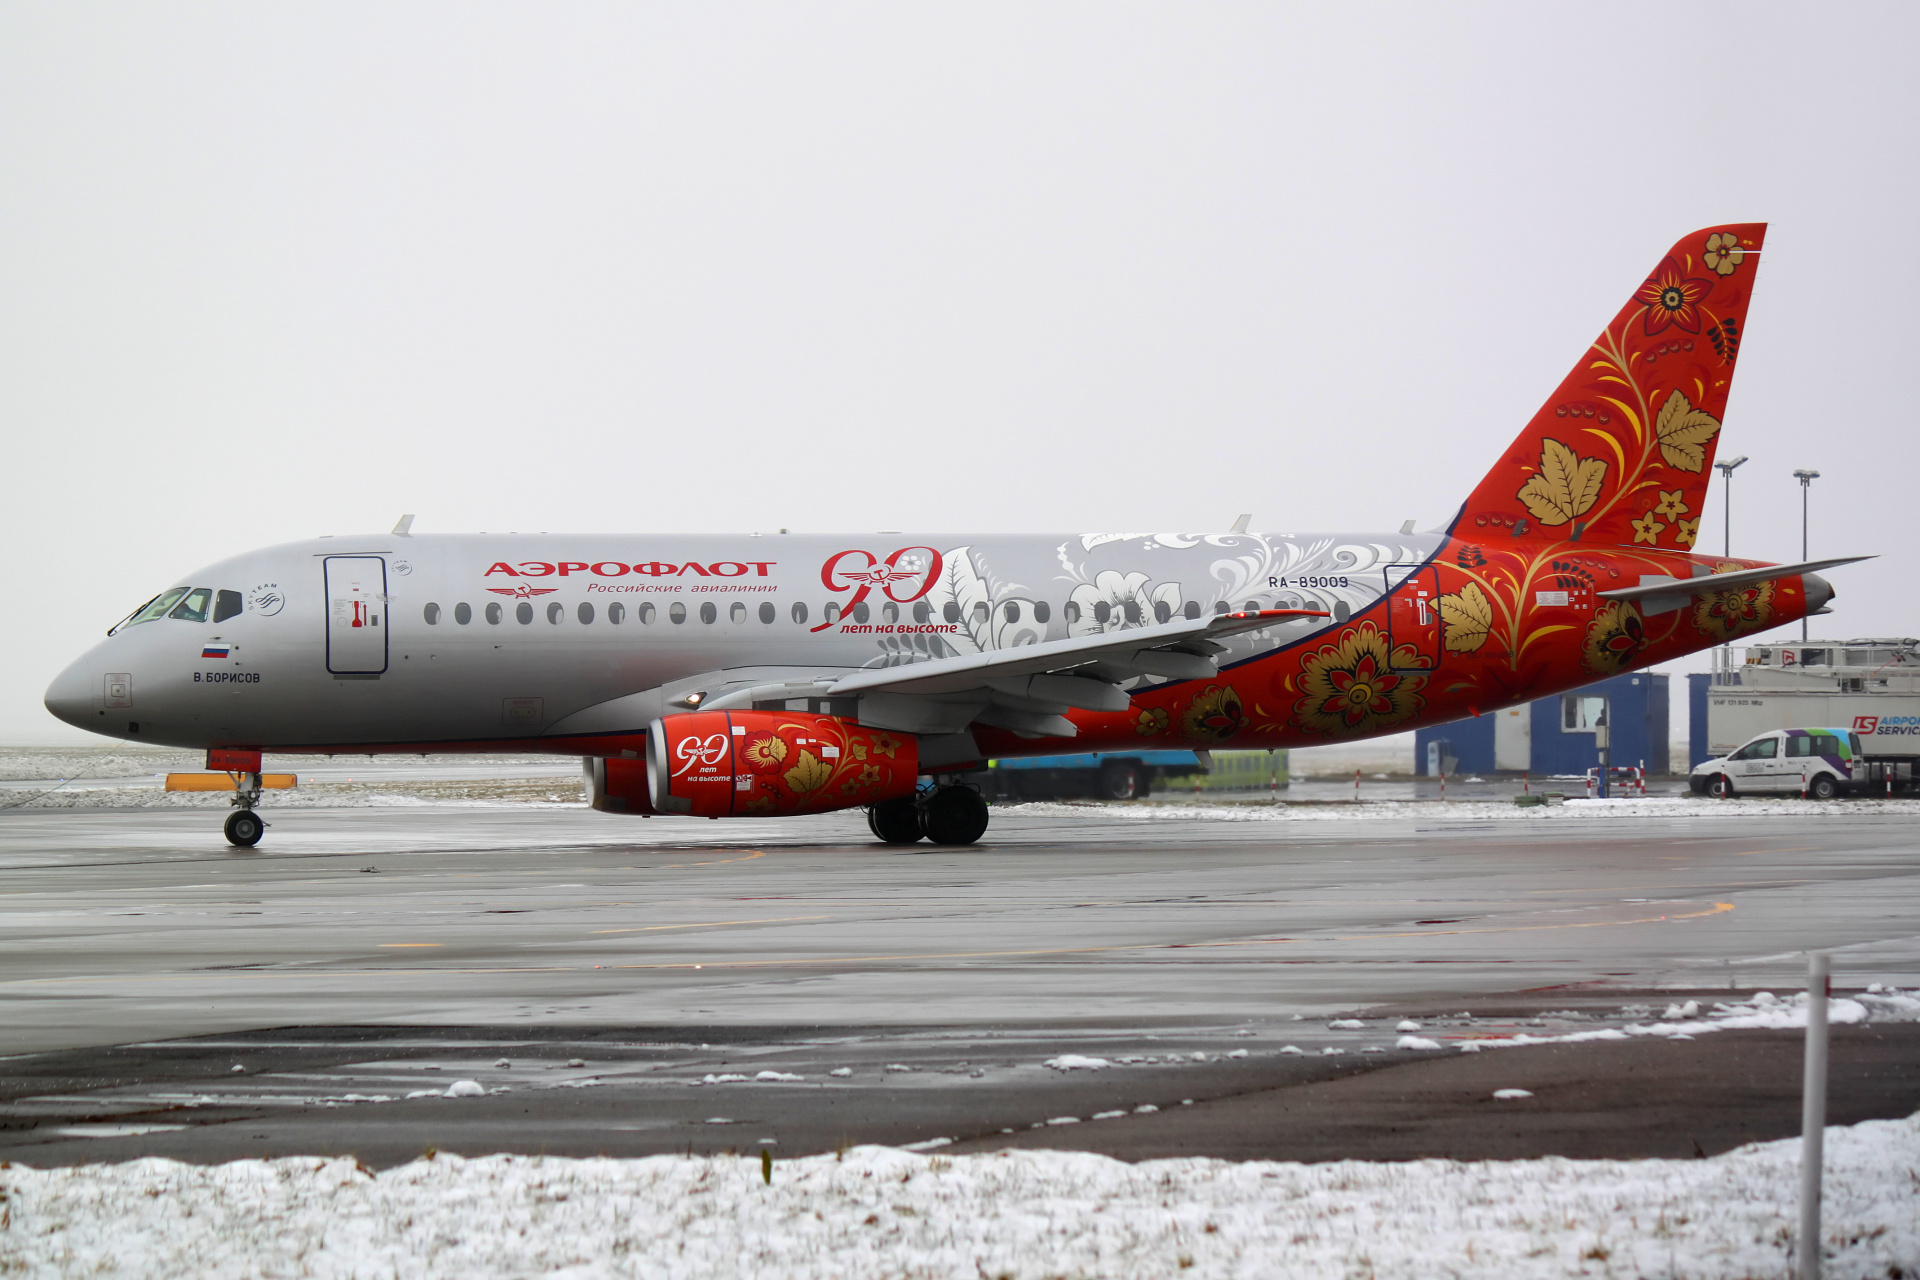 RA-89009 (90 years in the Sky livery) (Aircraft » EPWA Spotting » Sukhoi Superjet 100-95B » Aeroflot Russian Airlines)